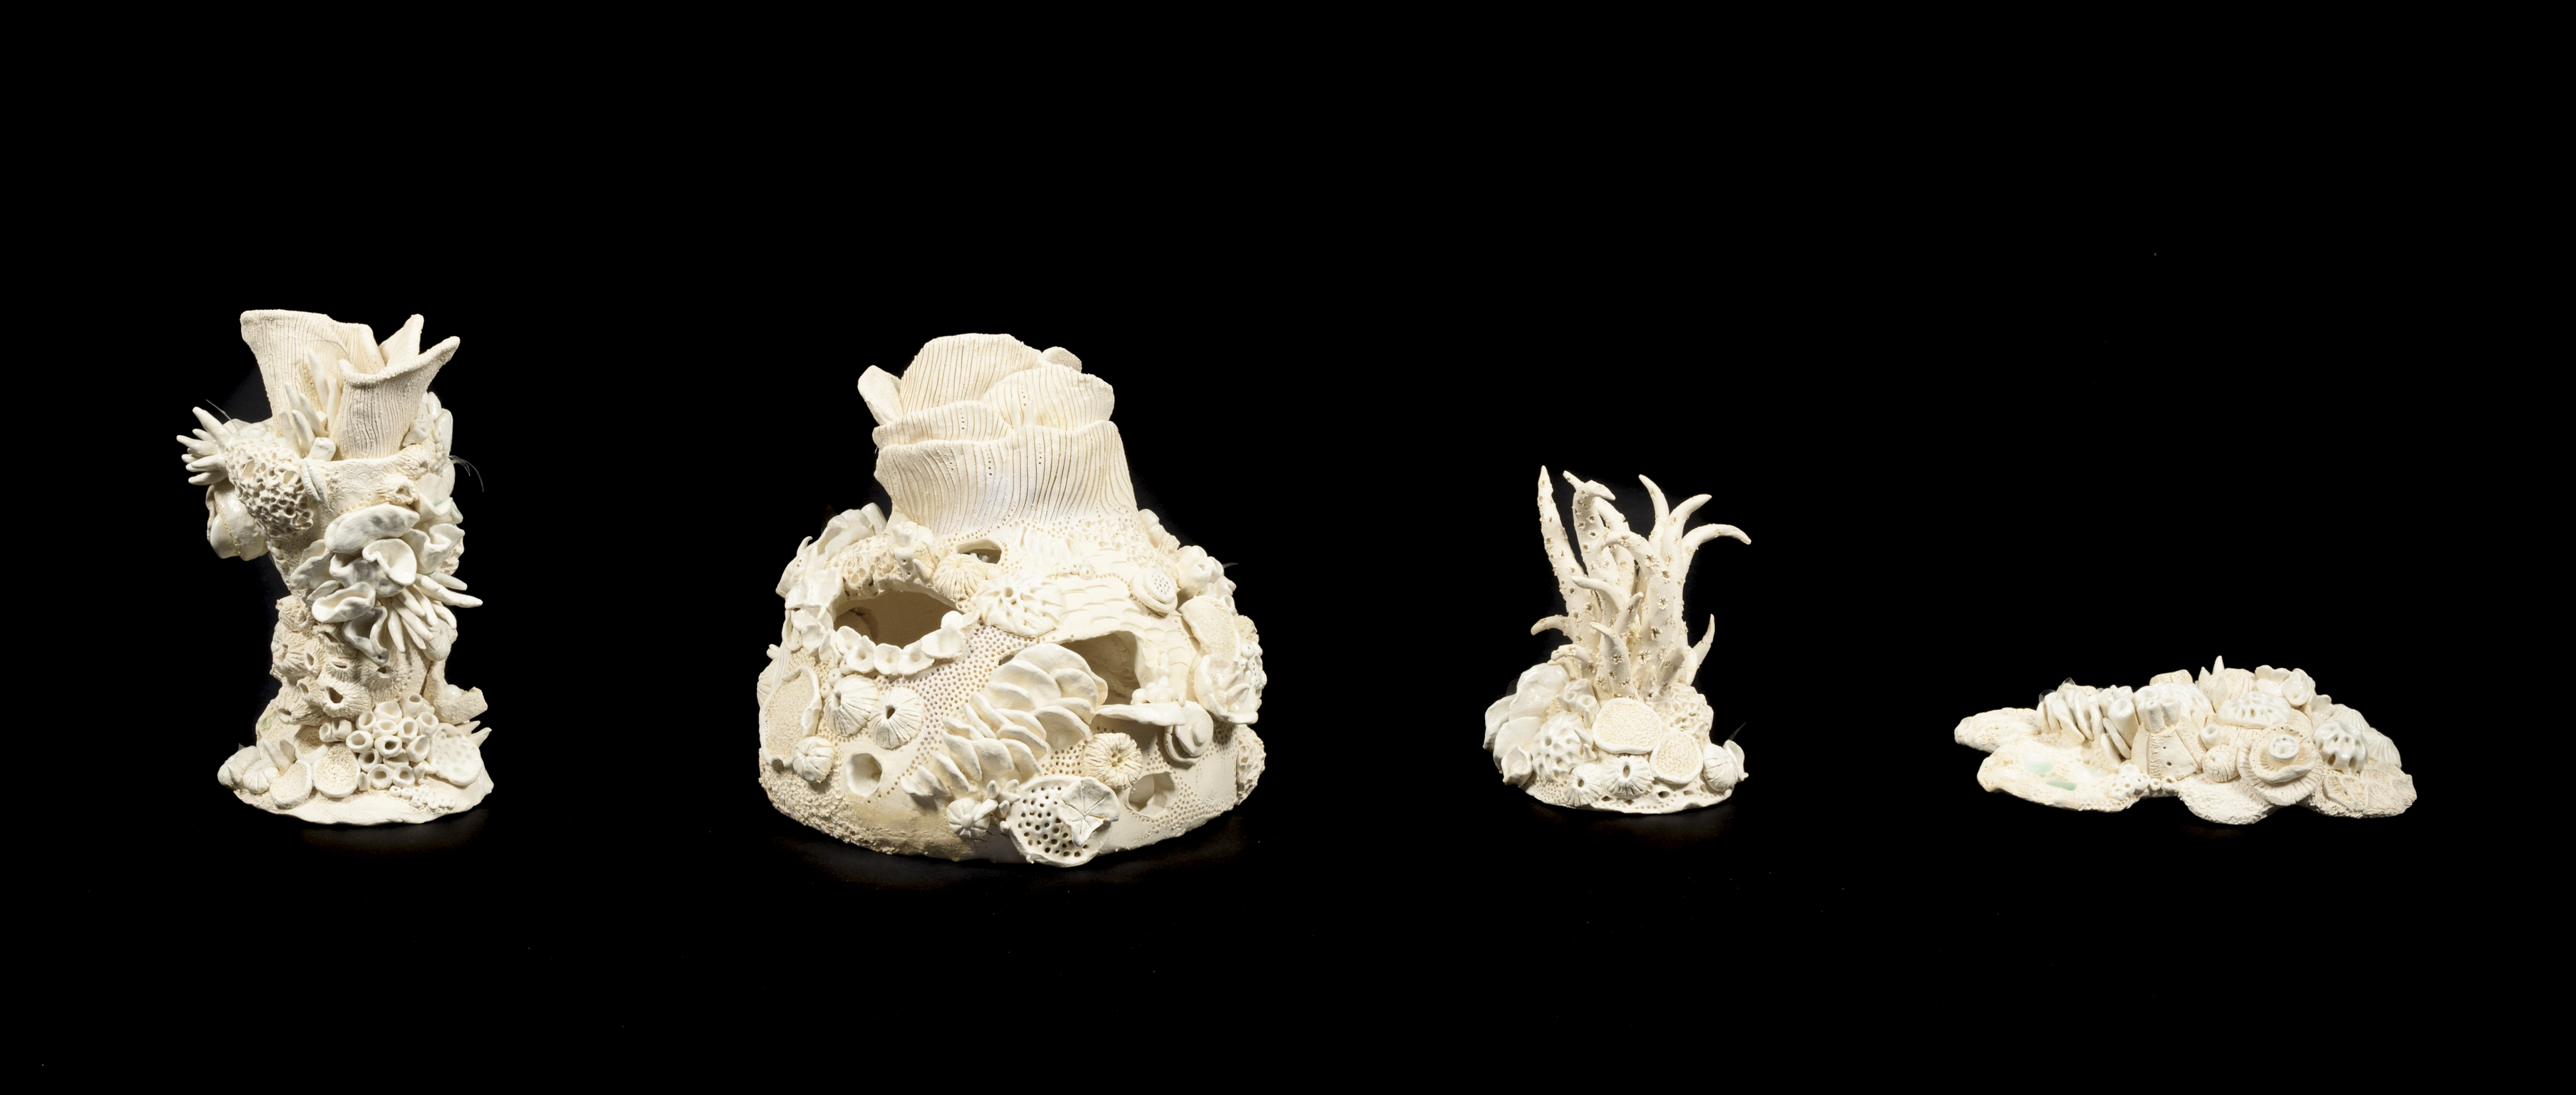 Four ceramic sculptures of various sizes that look like bleached coral structures.